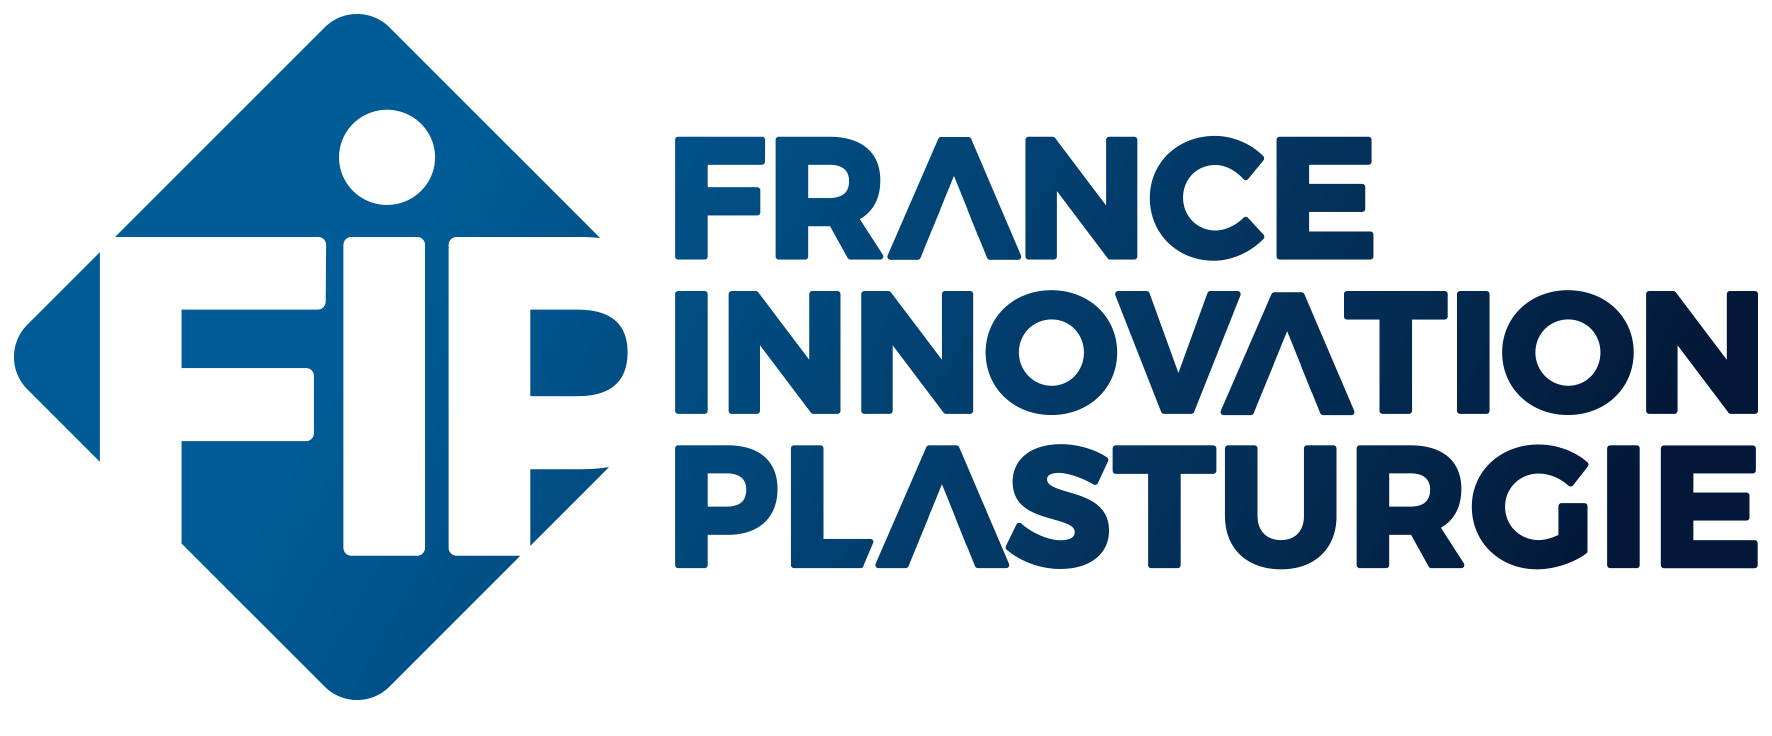 NGC exhibits at France Innovation Plasturgie FIP 2021